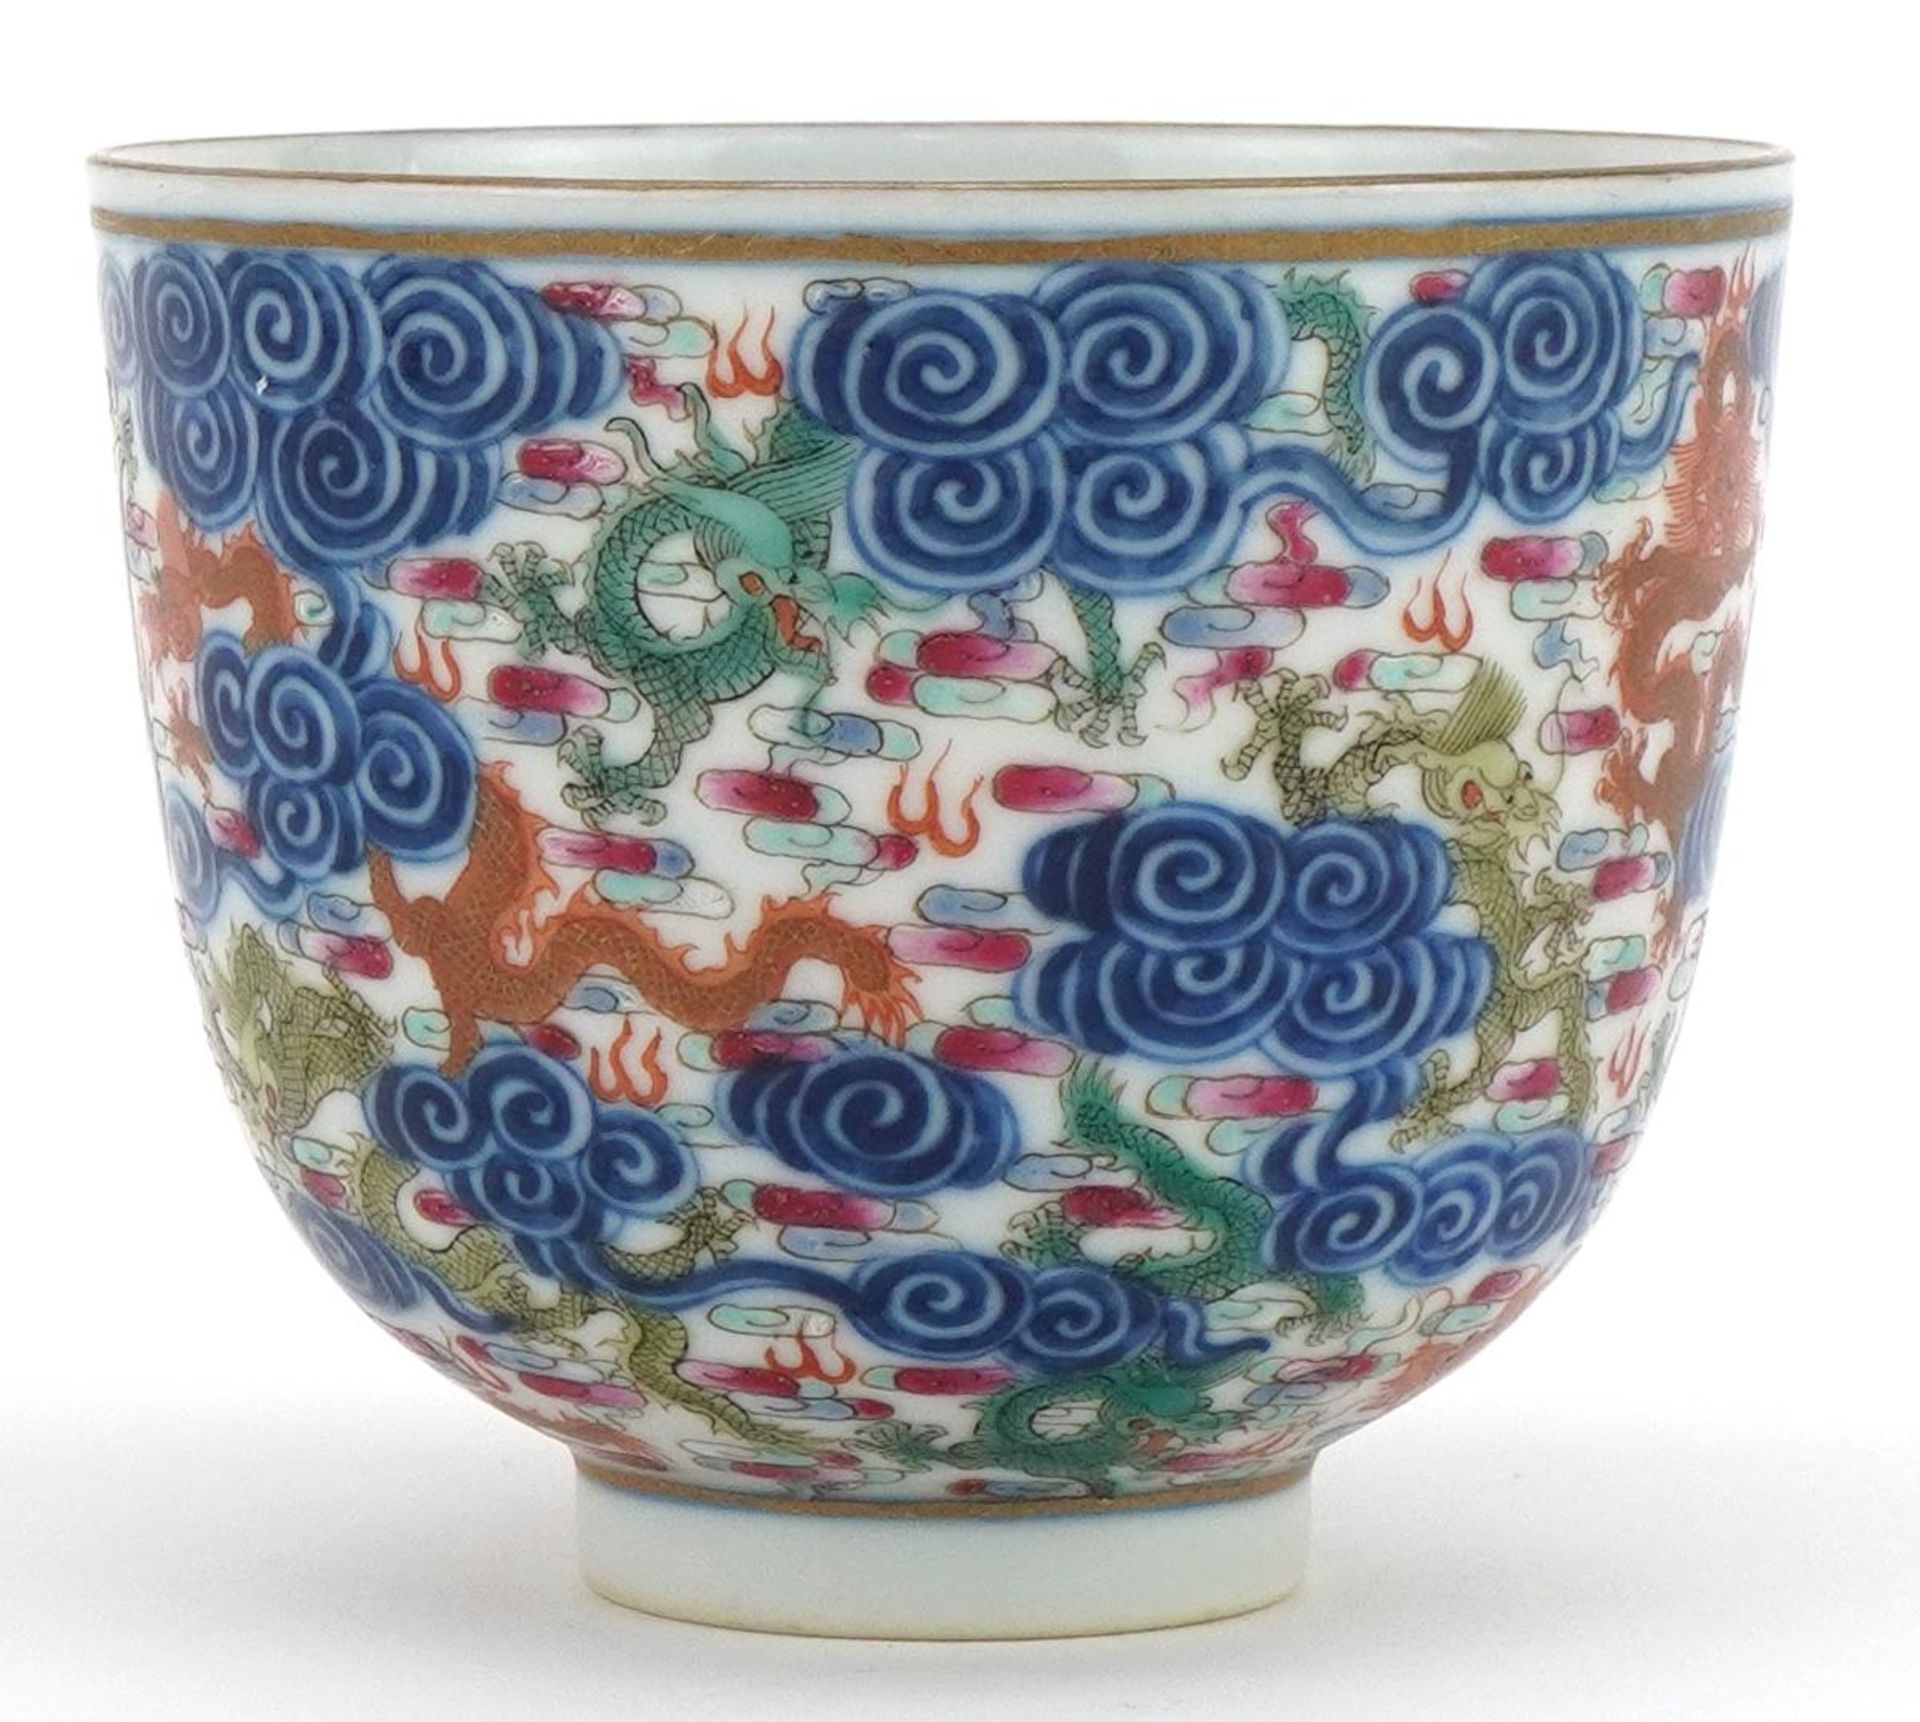 Chinese doucai porcelain tea bowl hand painted with dragons amongst clouds, six figure character - Image 4 of 7